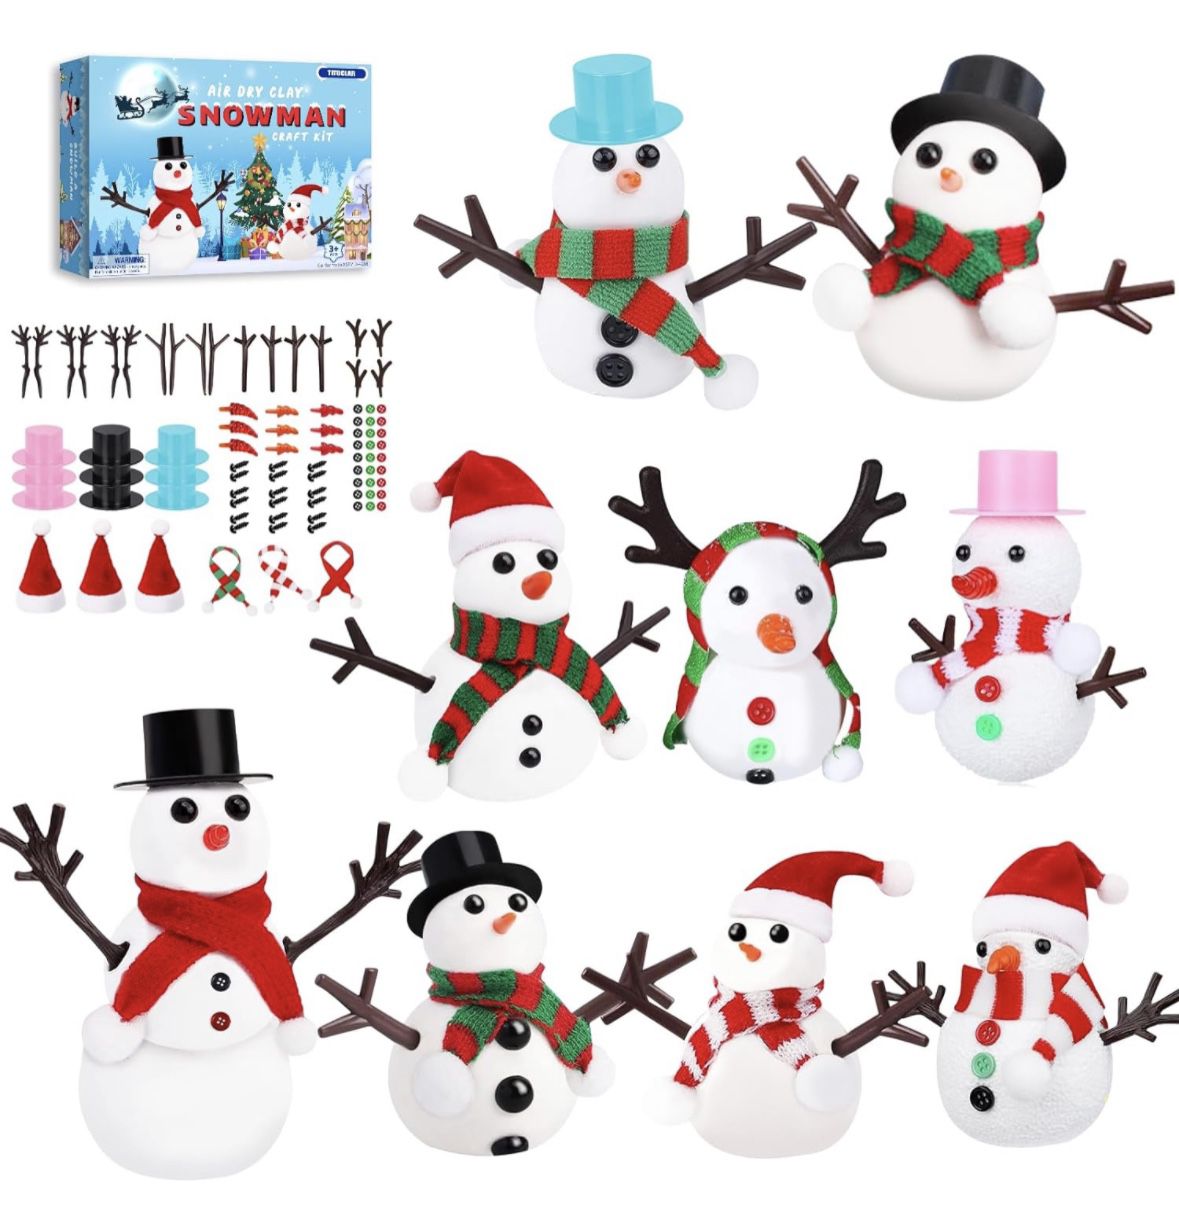 Christmas Crafts Xmas Gifts,Molding Clay Snowman DIY Kit,9Pack Build a Snowman Kit for boys & girls